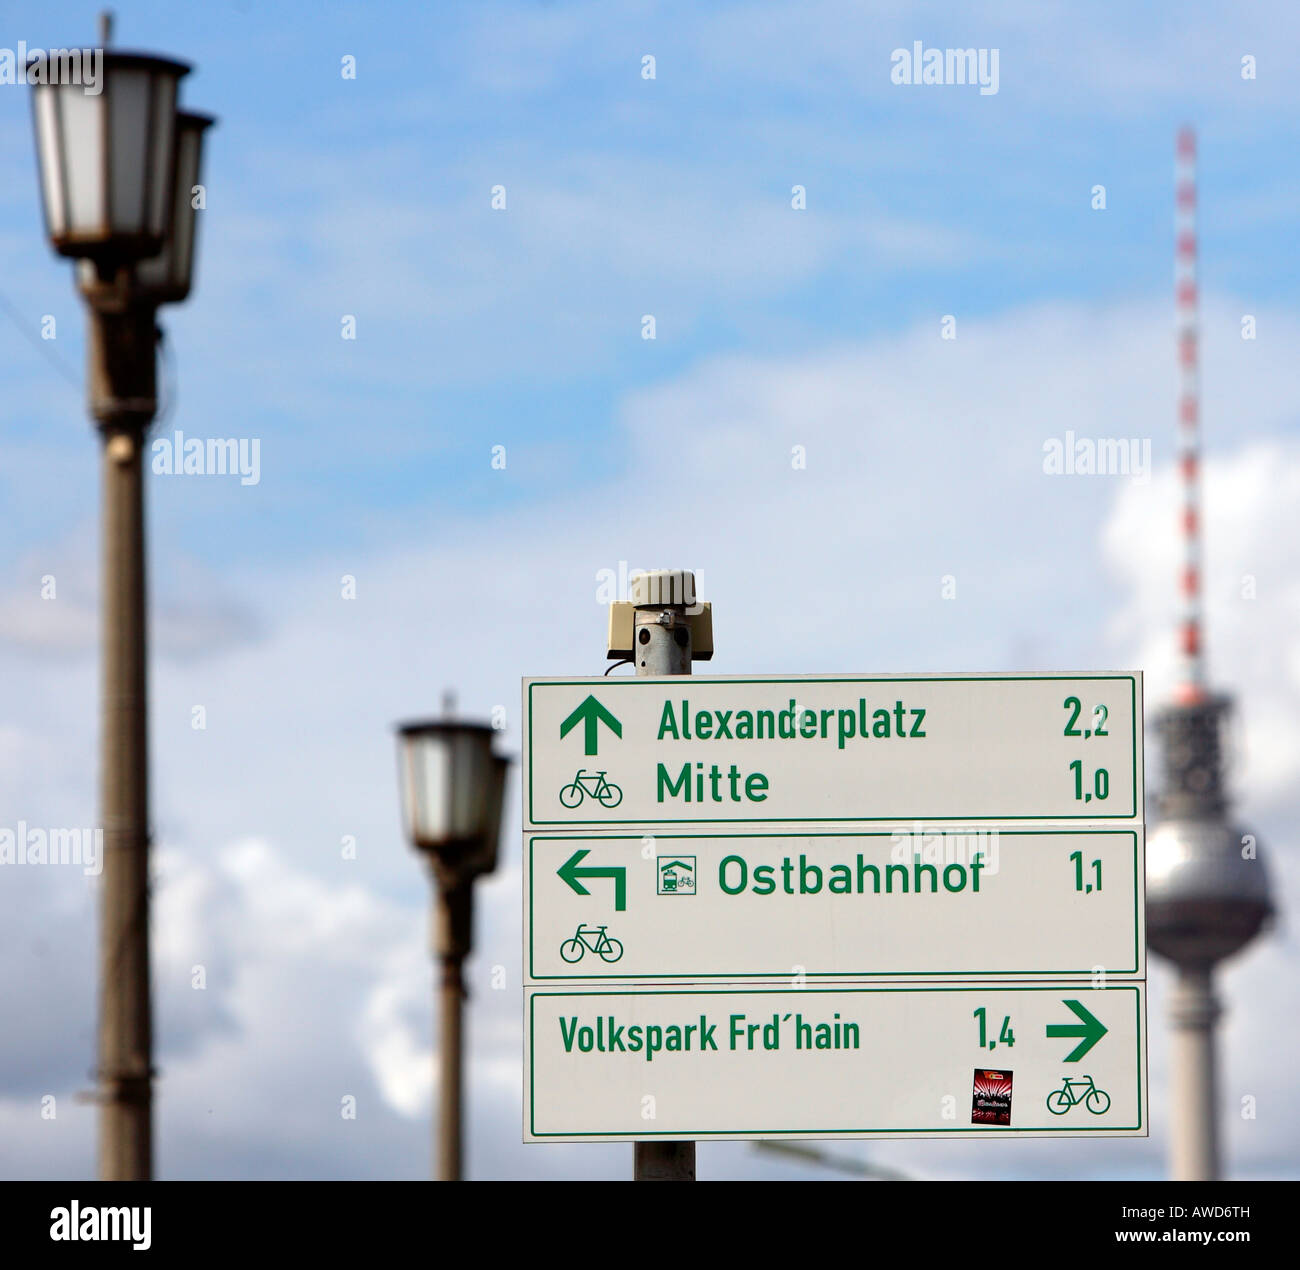 Bicycle tour in heaven - Signs beside old street lanterns and the tv tower show directions to different places in Berlin, Germa Stock Photo